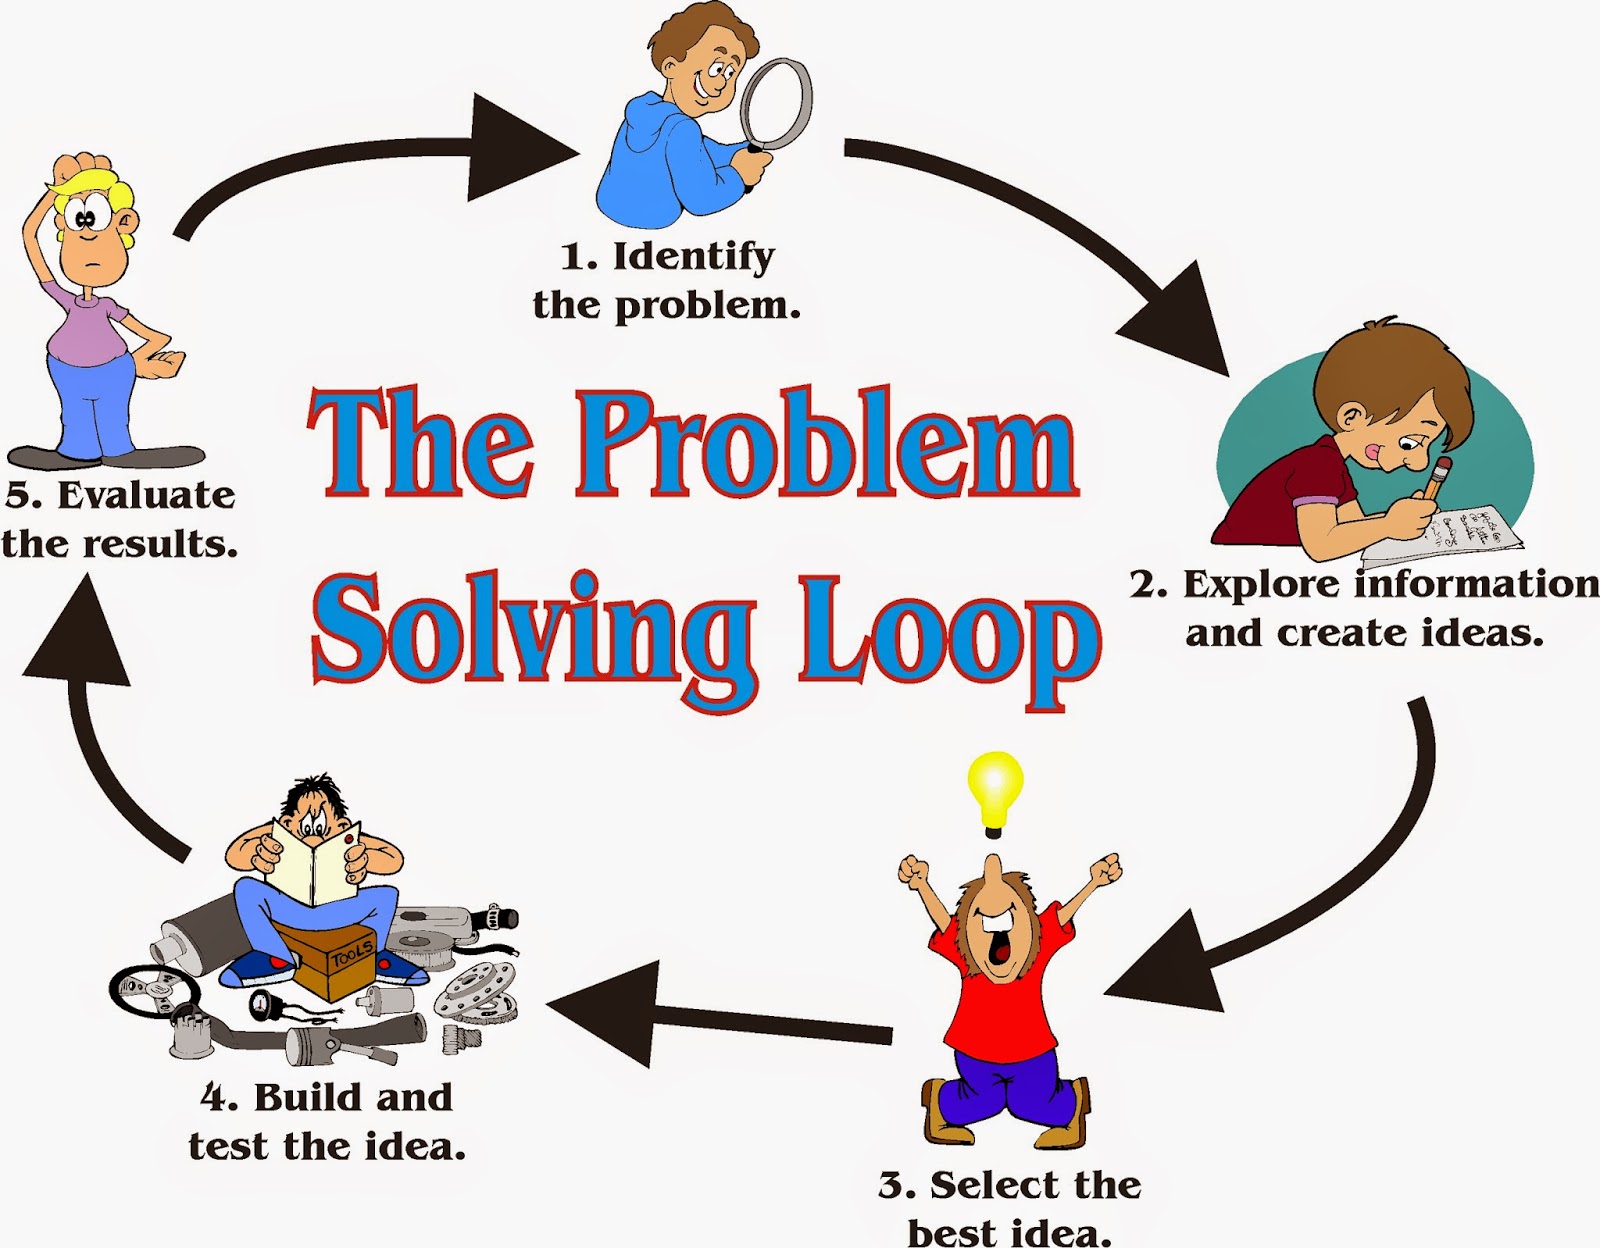 five basic skills in problem solving related to technology